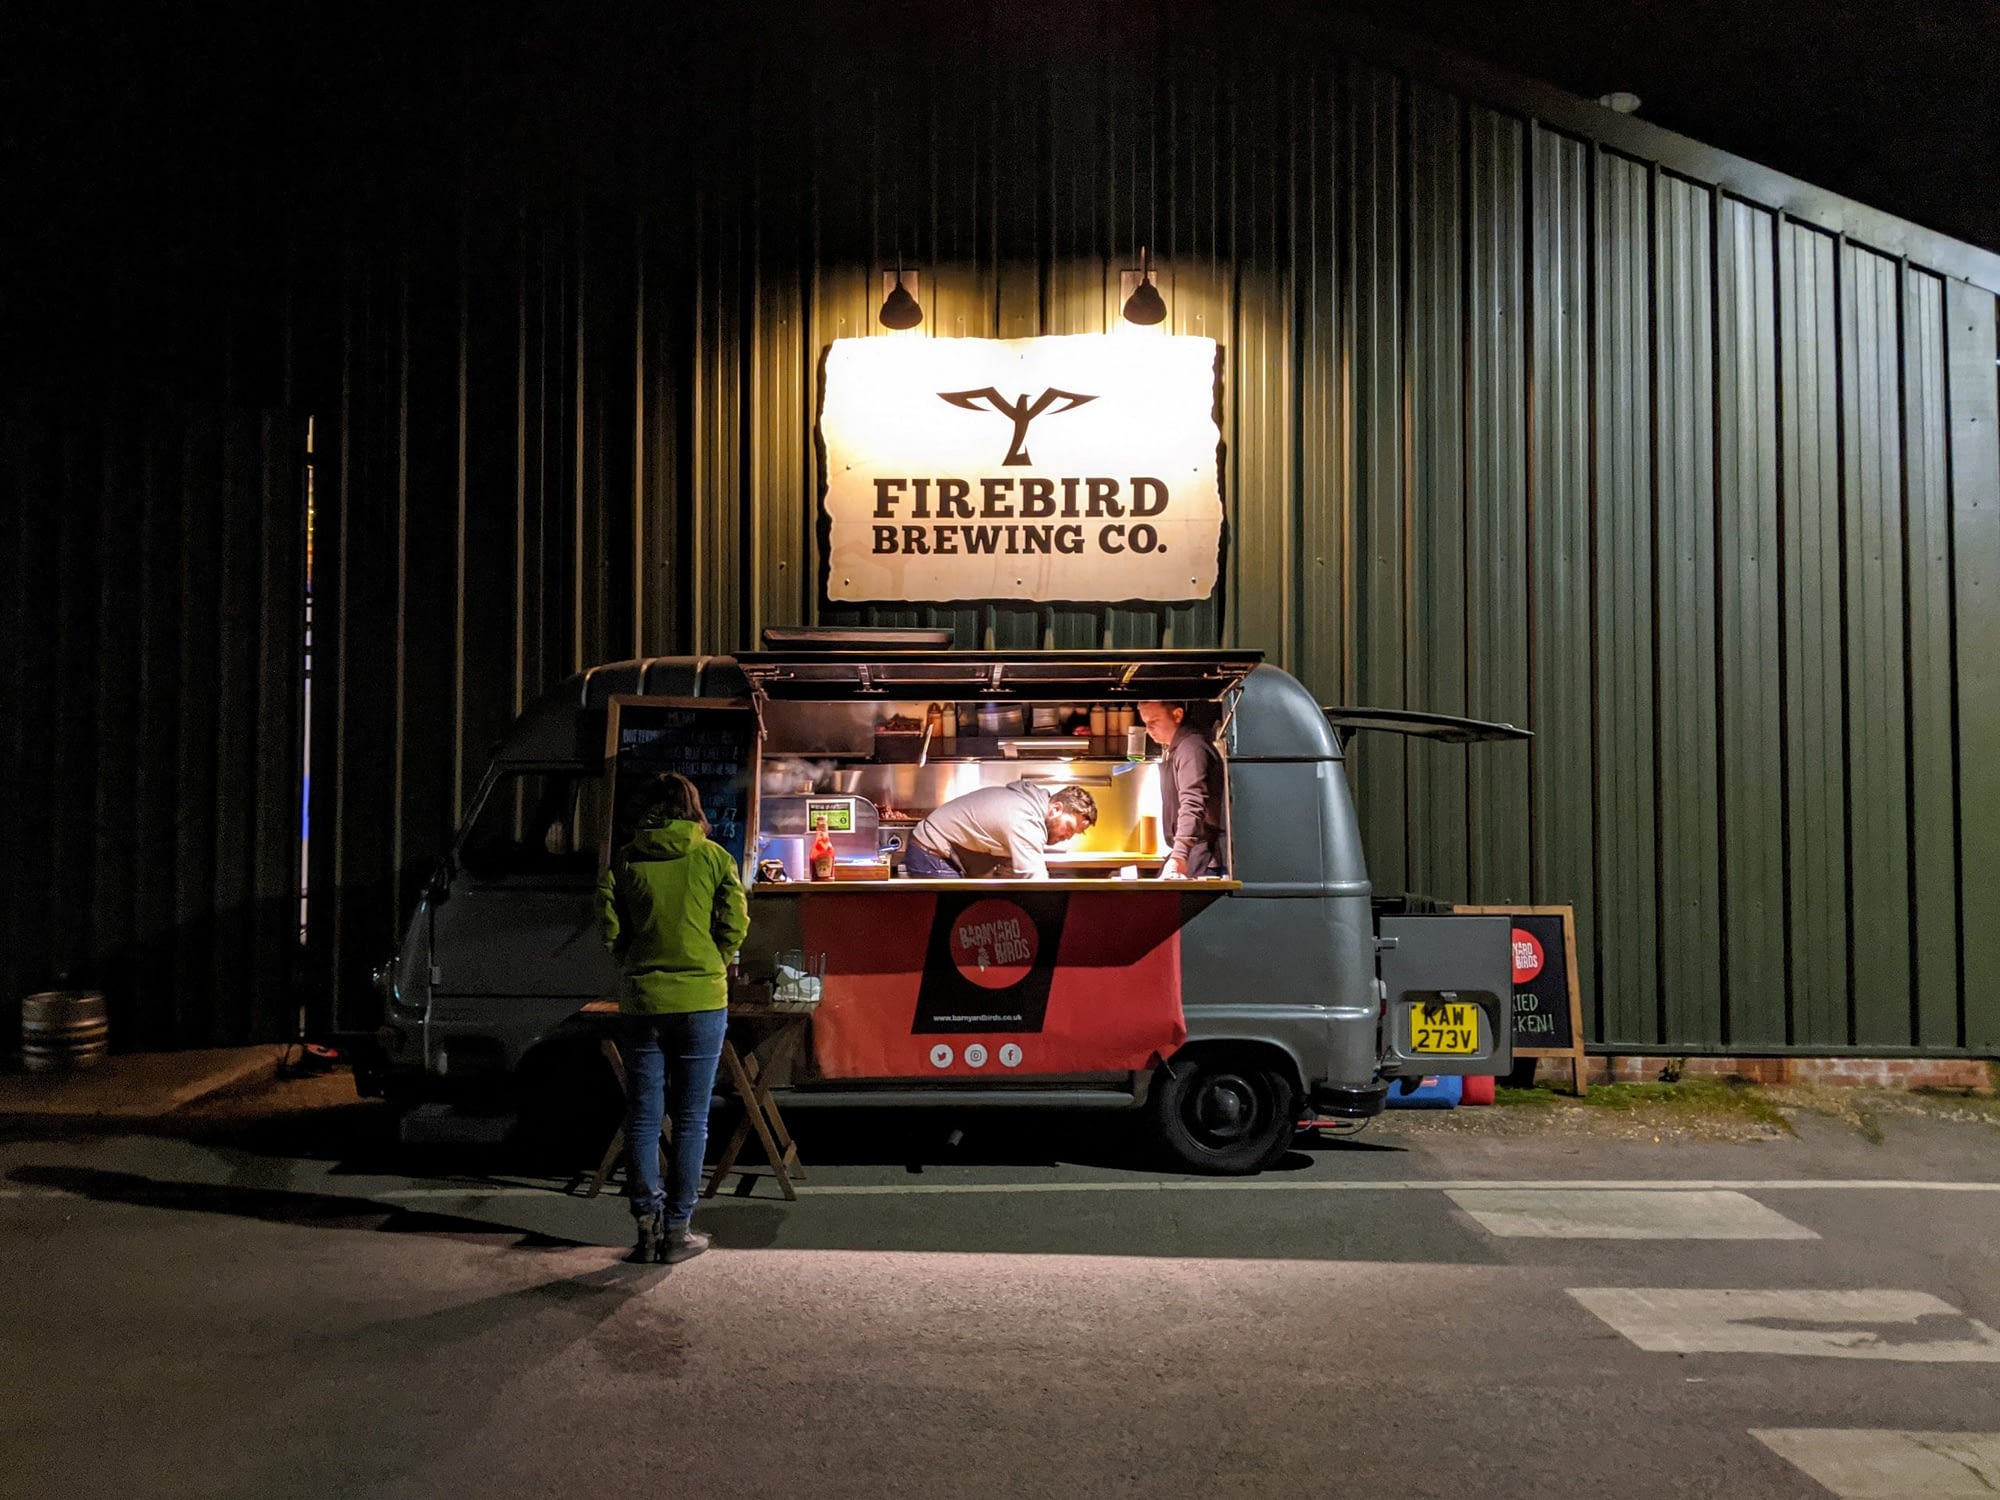 Firebird Brewing Company - Local Craft Brewery - Sussex Craft Ale - Fantastic independent Beer brewer